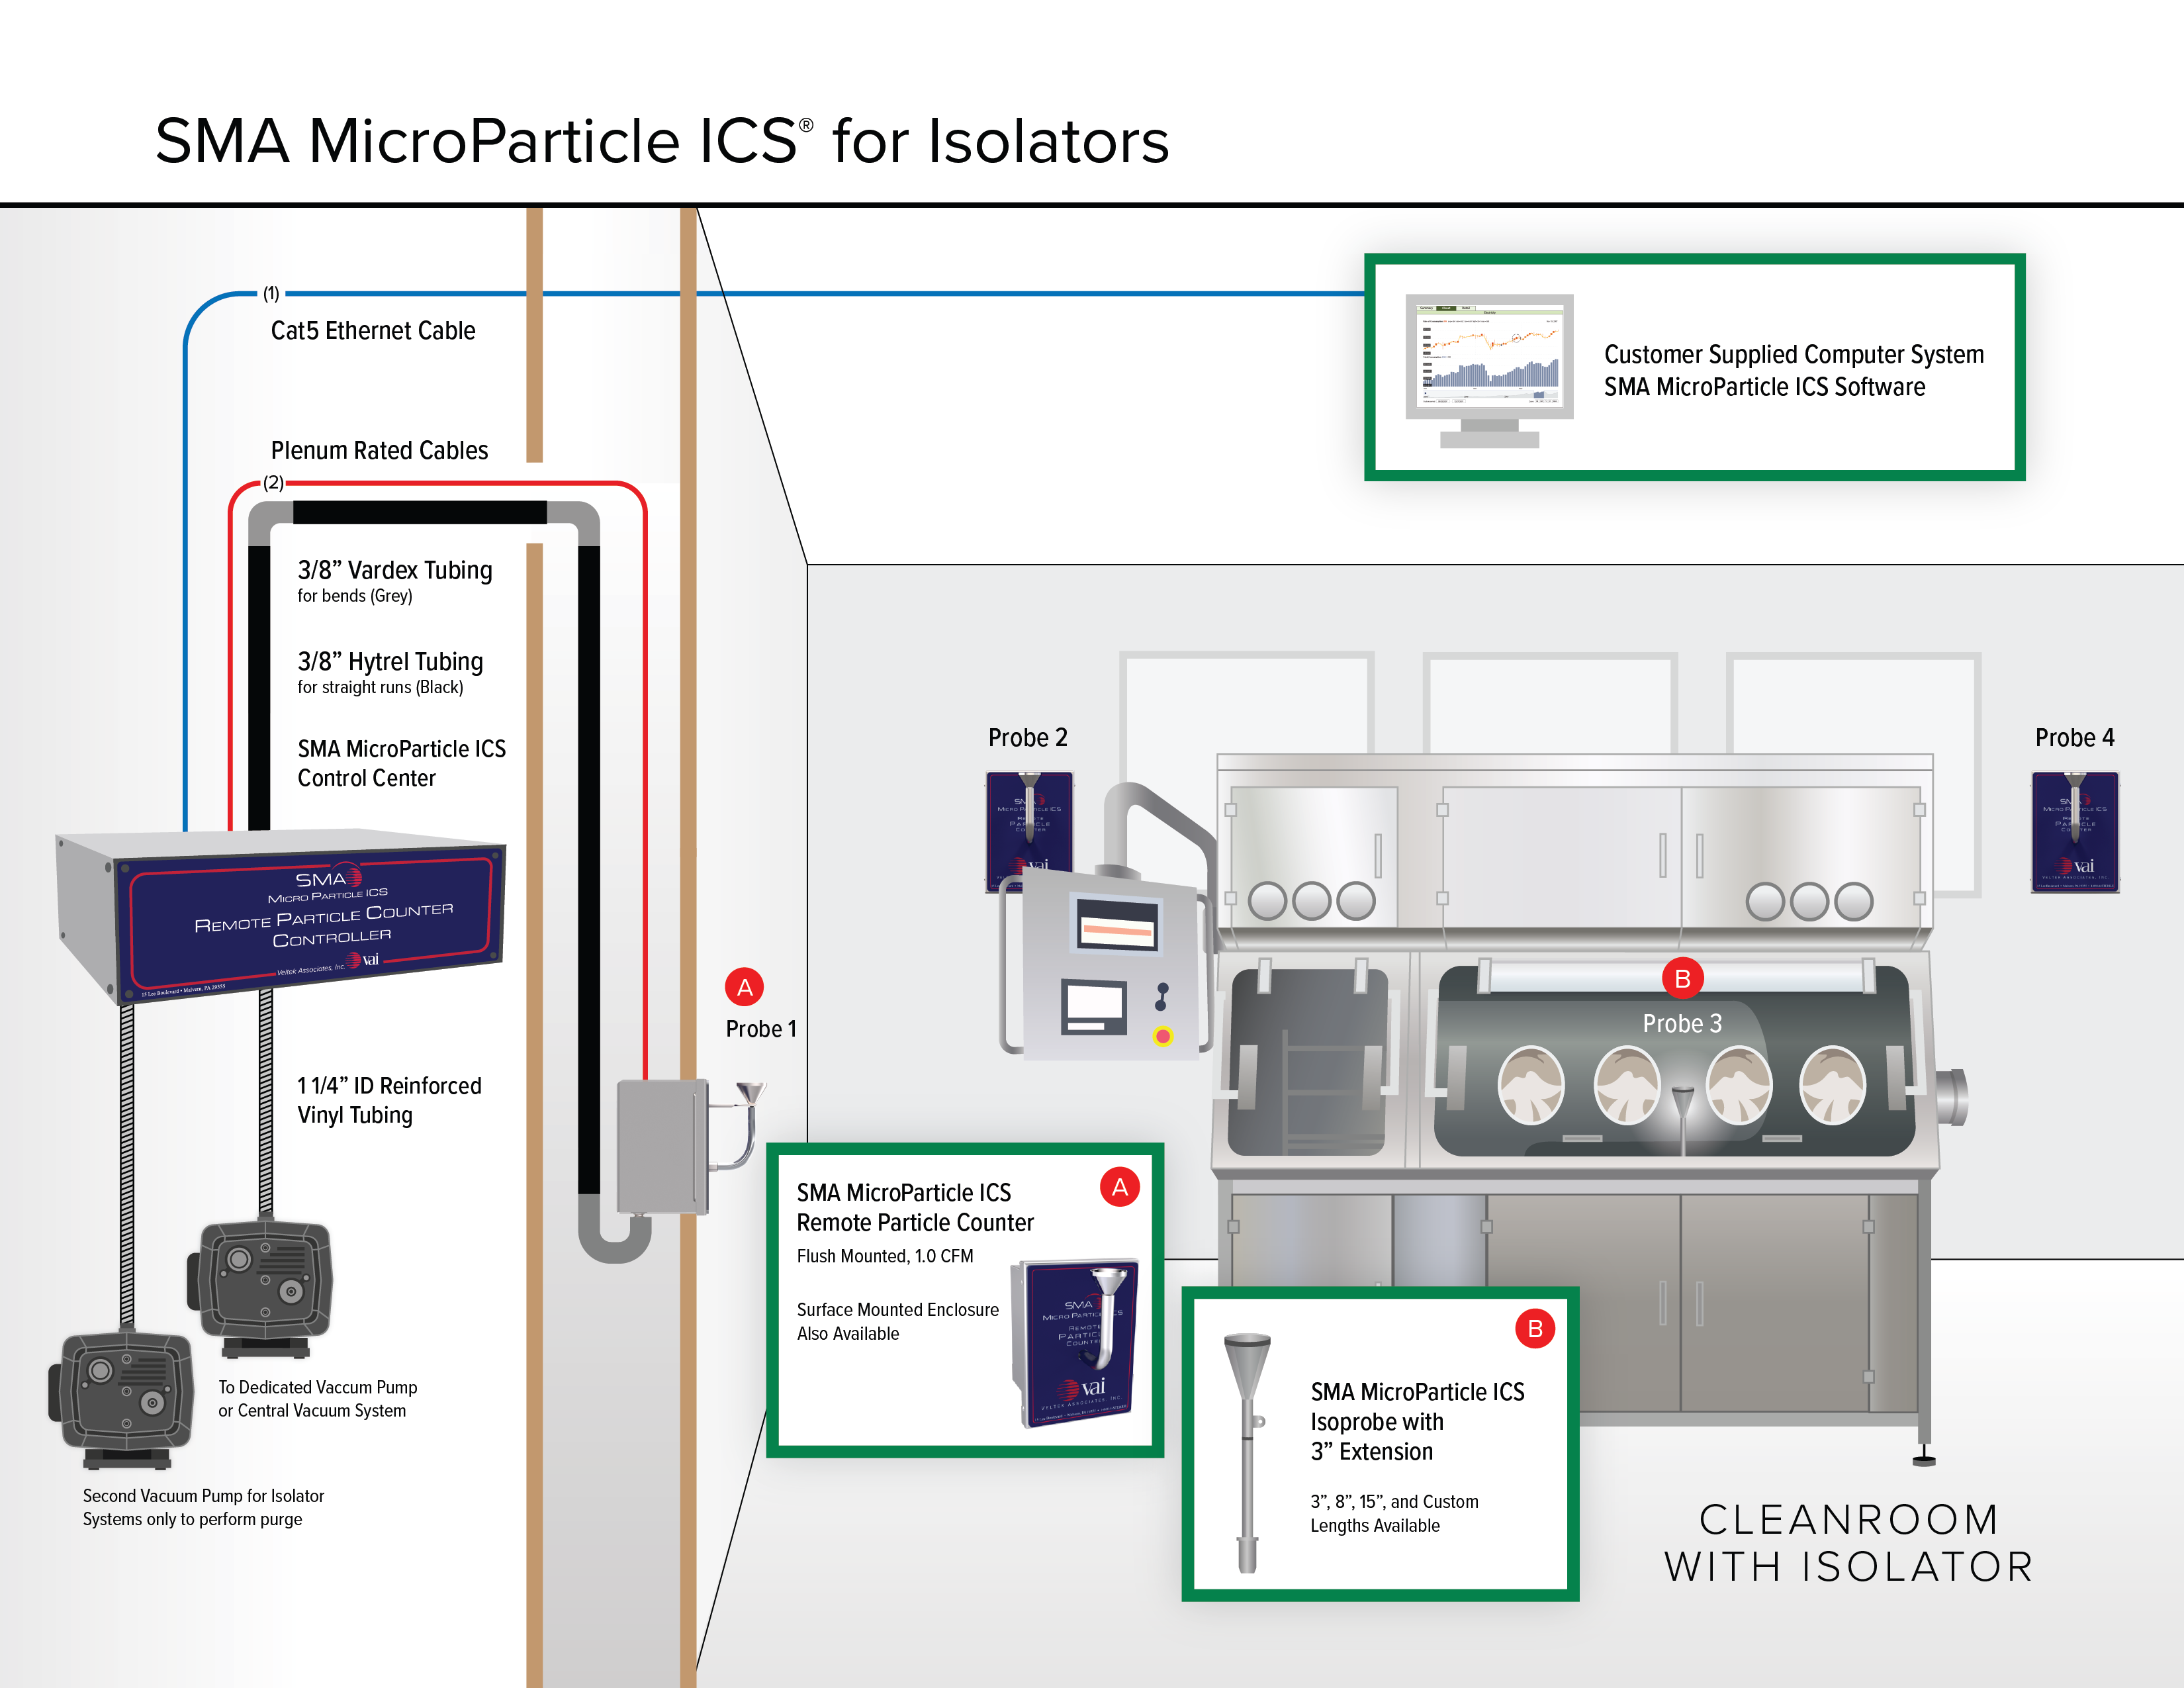 SMA MicroParticle ICS for Isolators